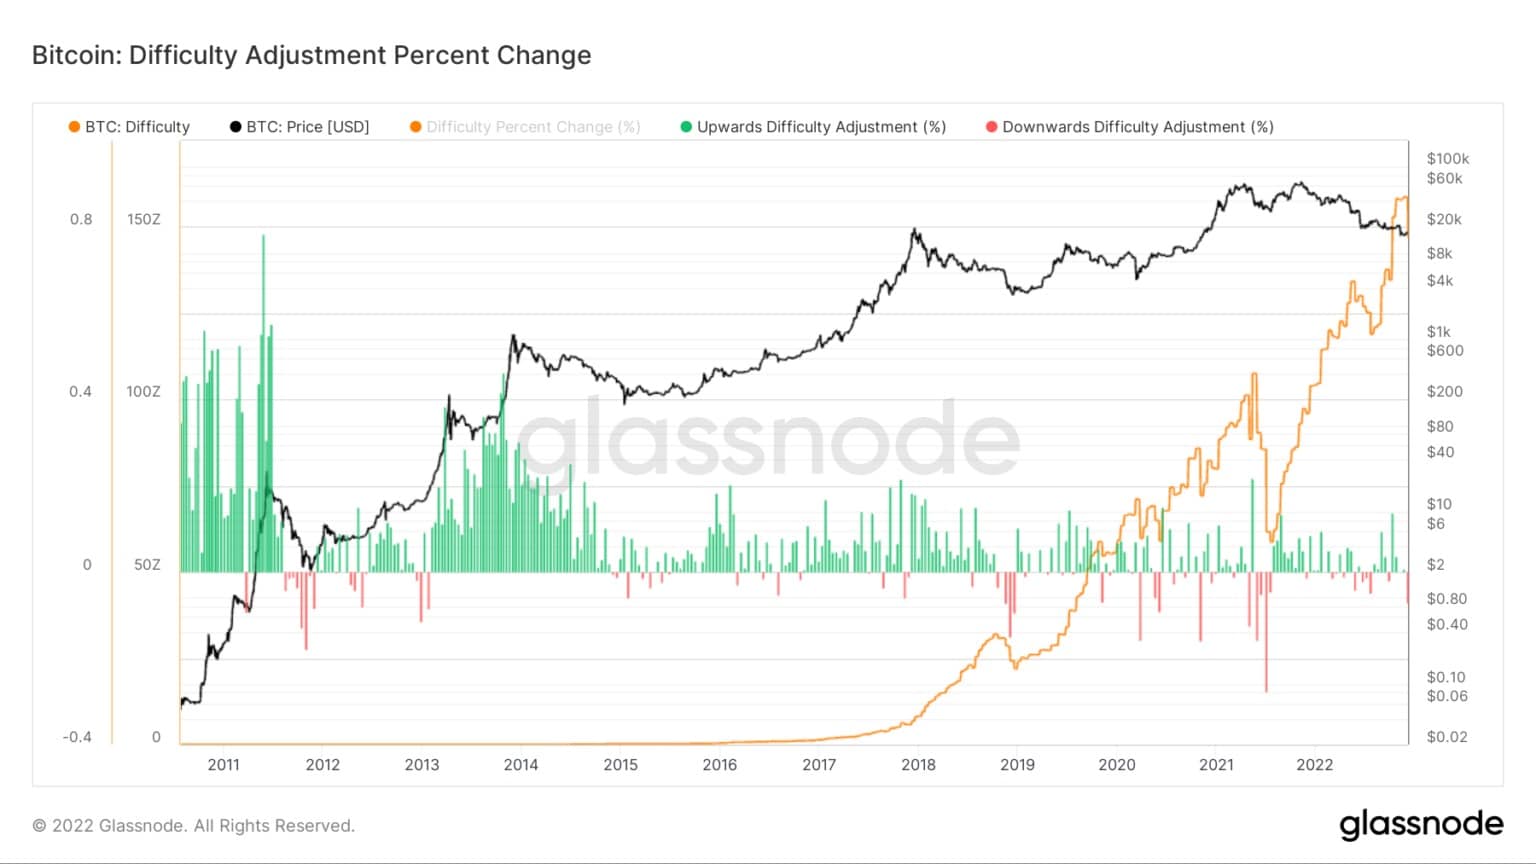 Graph showing Bitcoin's mining difficulty adjustment percent change from 2011 to 2022 (Source: Glassnode)